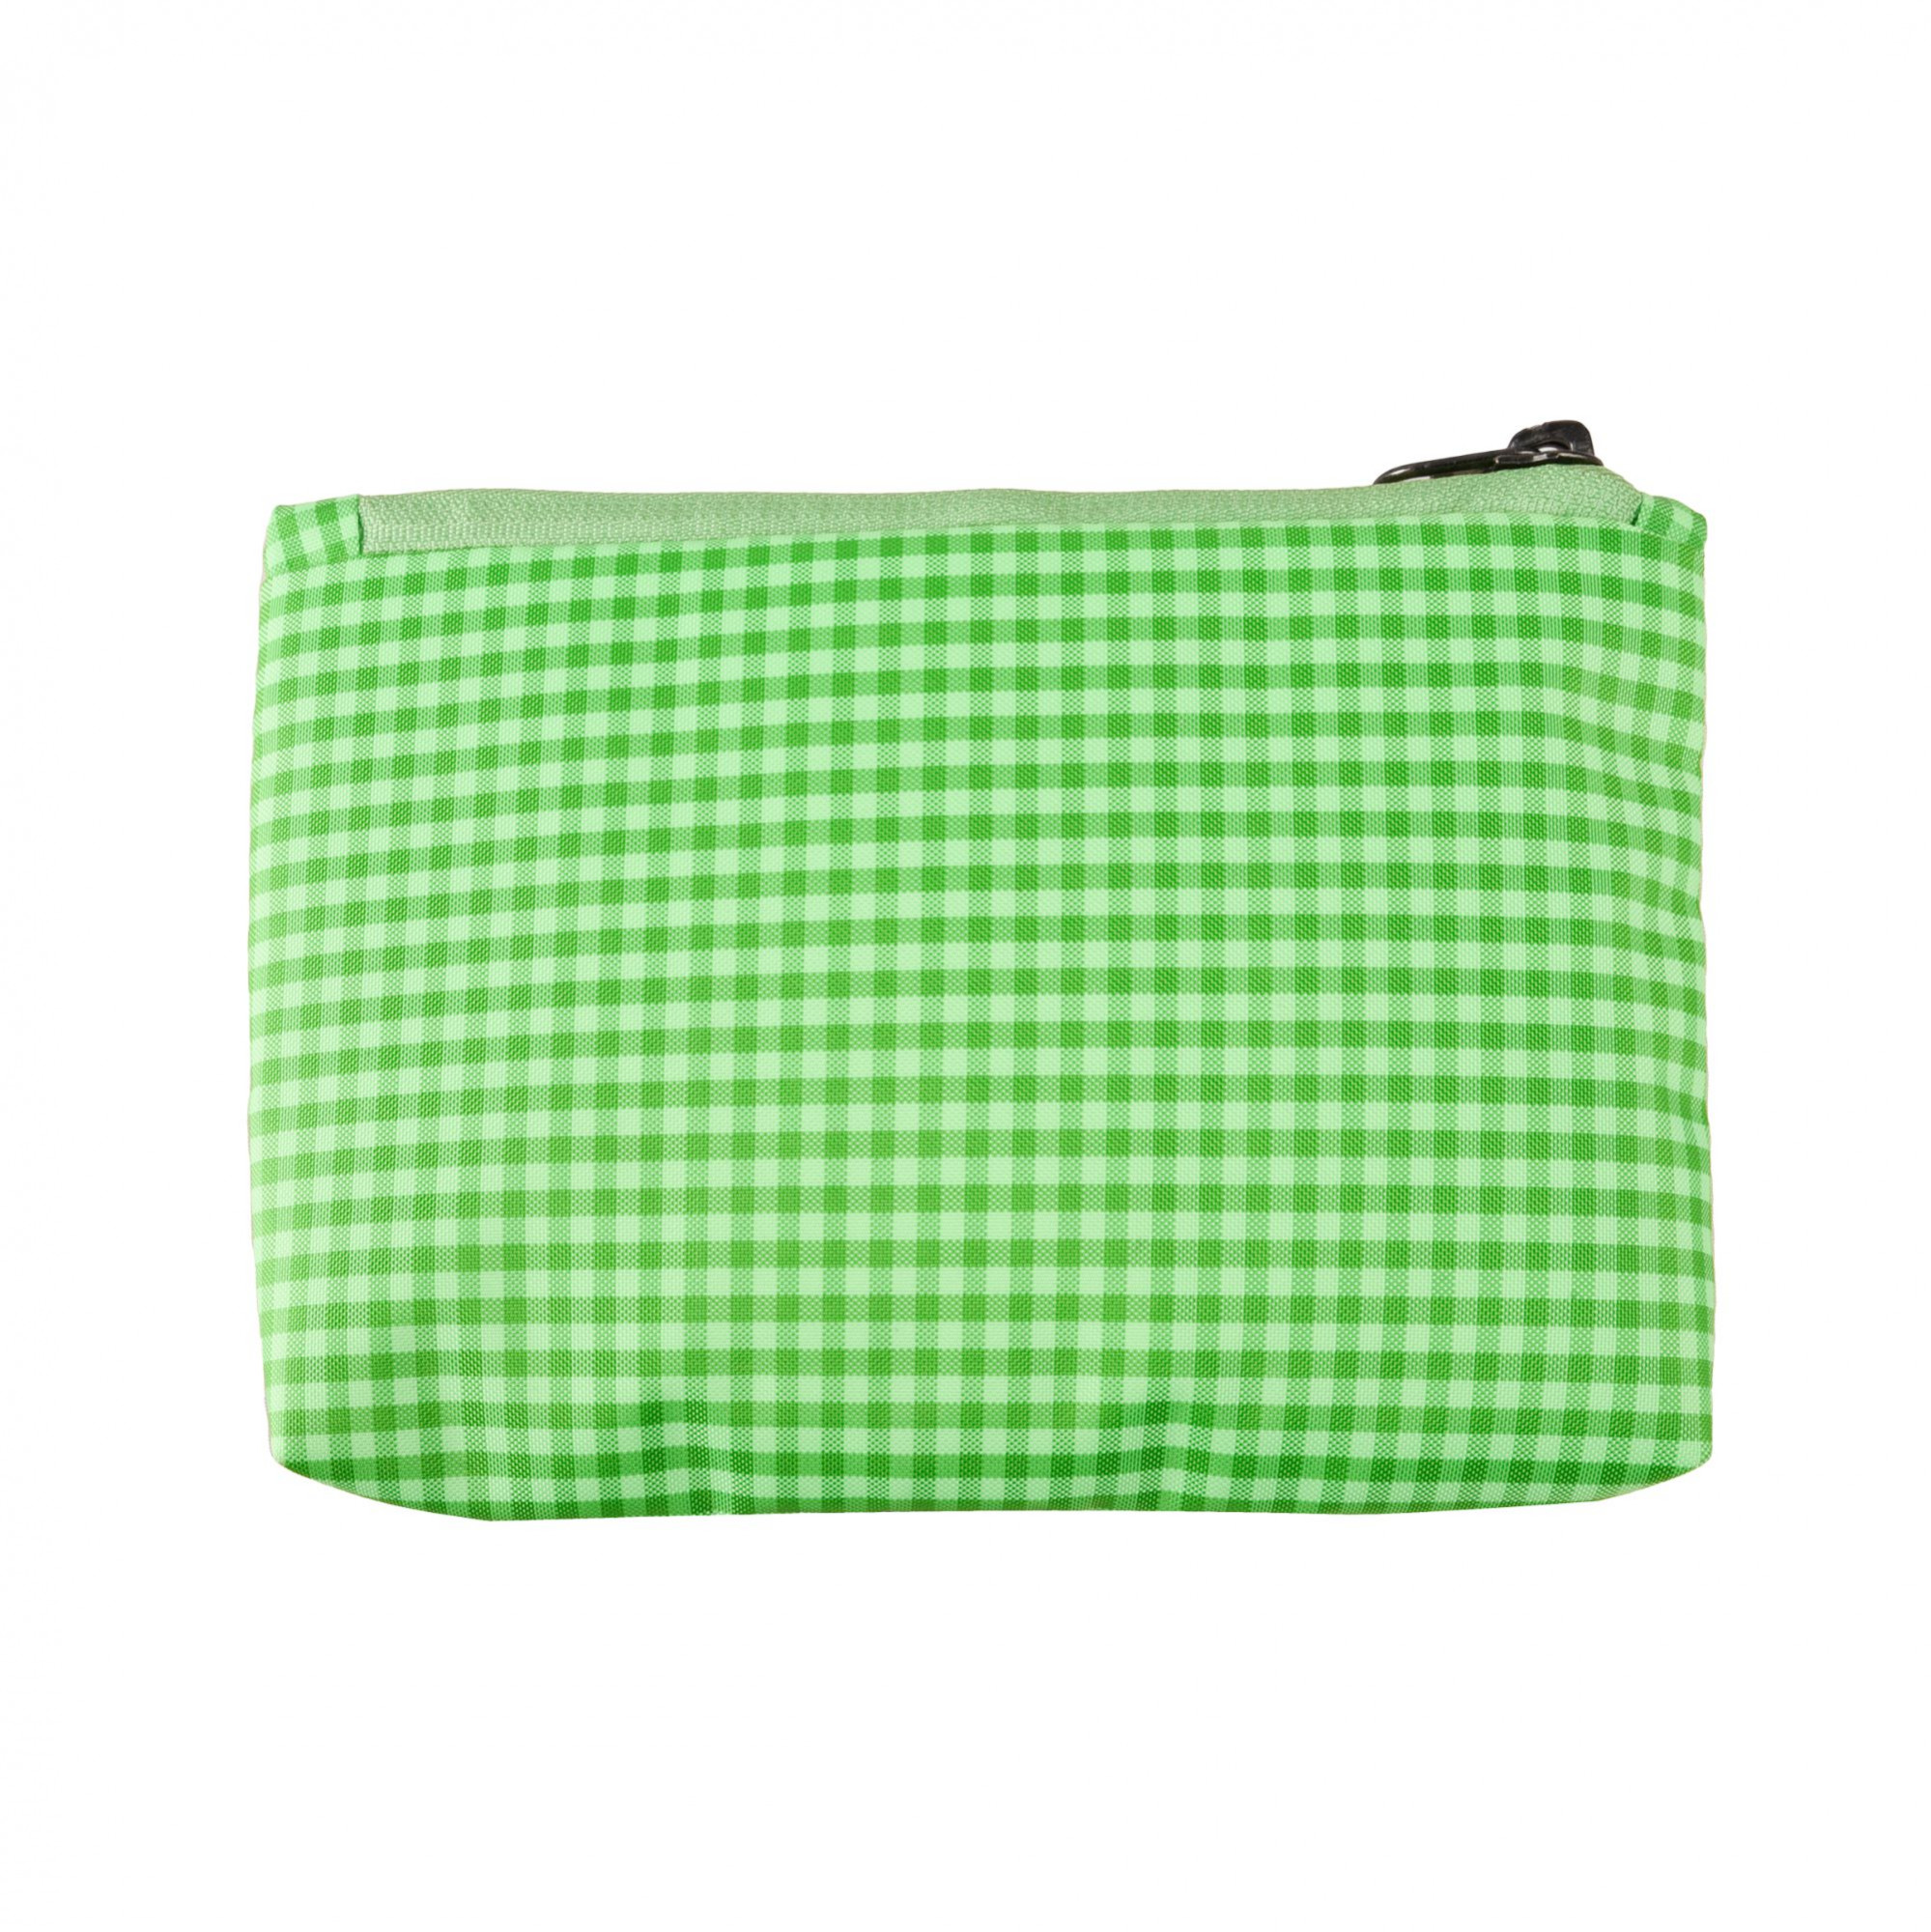 Kuber Industries Pencil Pouch | Square Stationary Pouch | Pen-Pencil Box for Kids | School Geometry Pouch | Pencil Utility Bag | Marvel Pencil Organizer | Green & Black